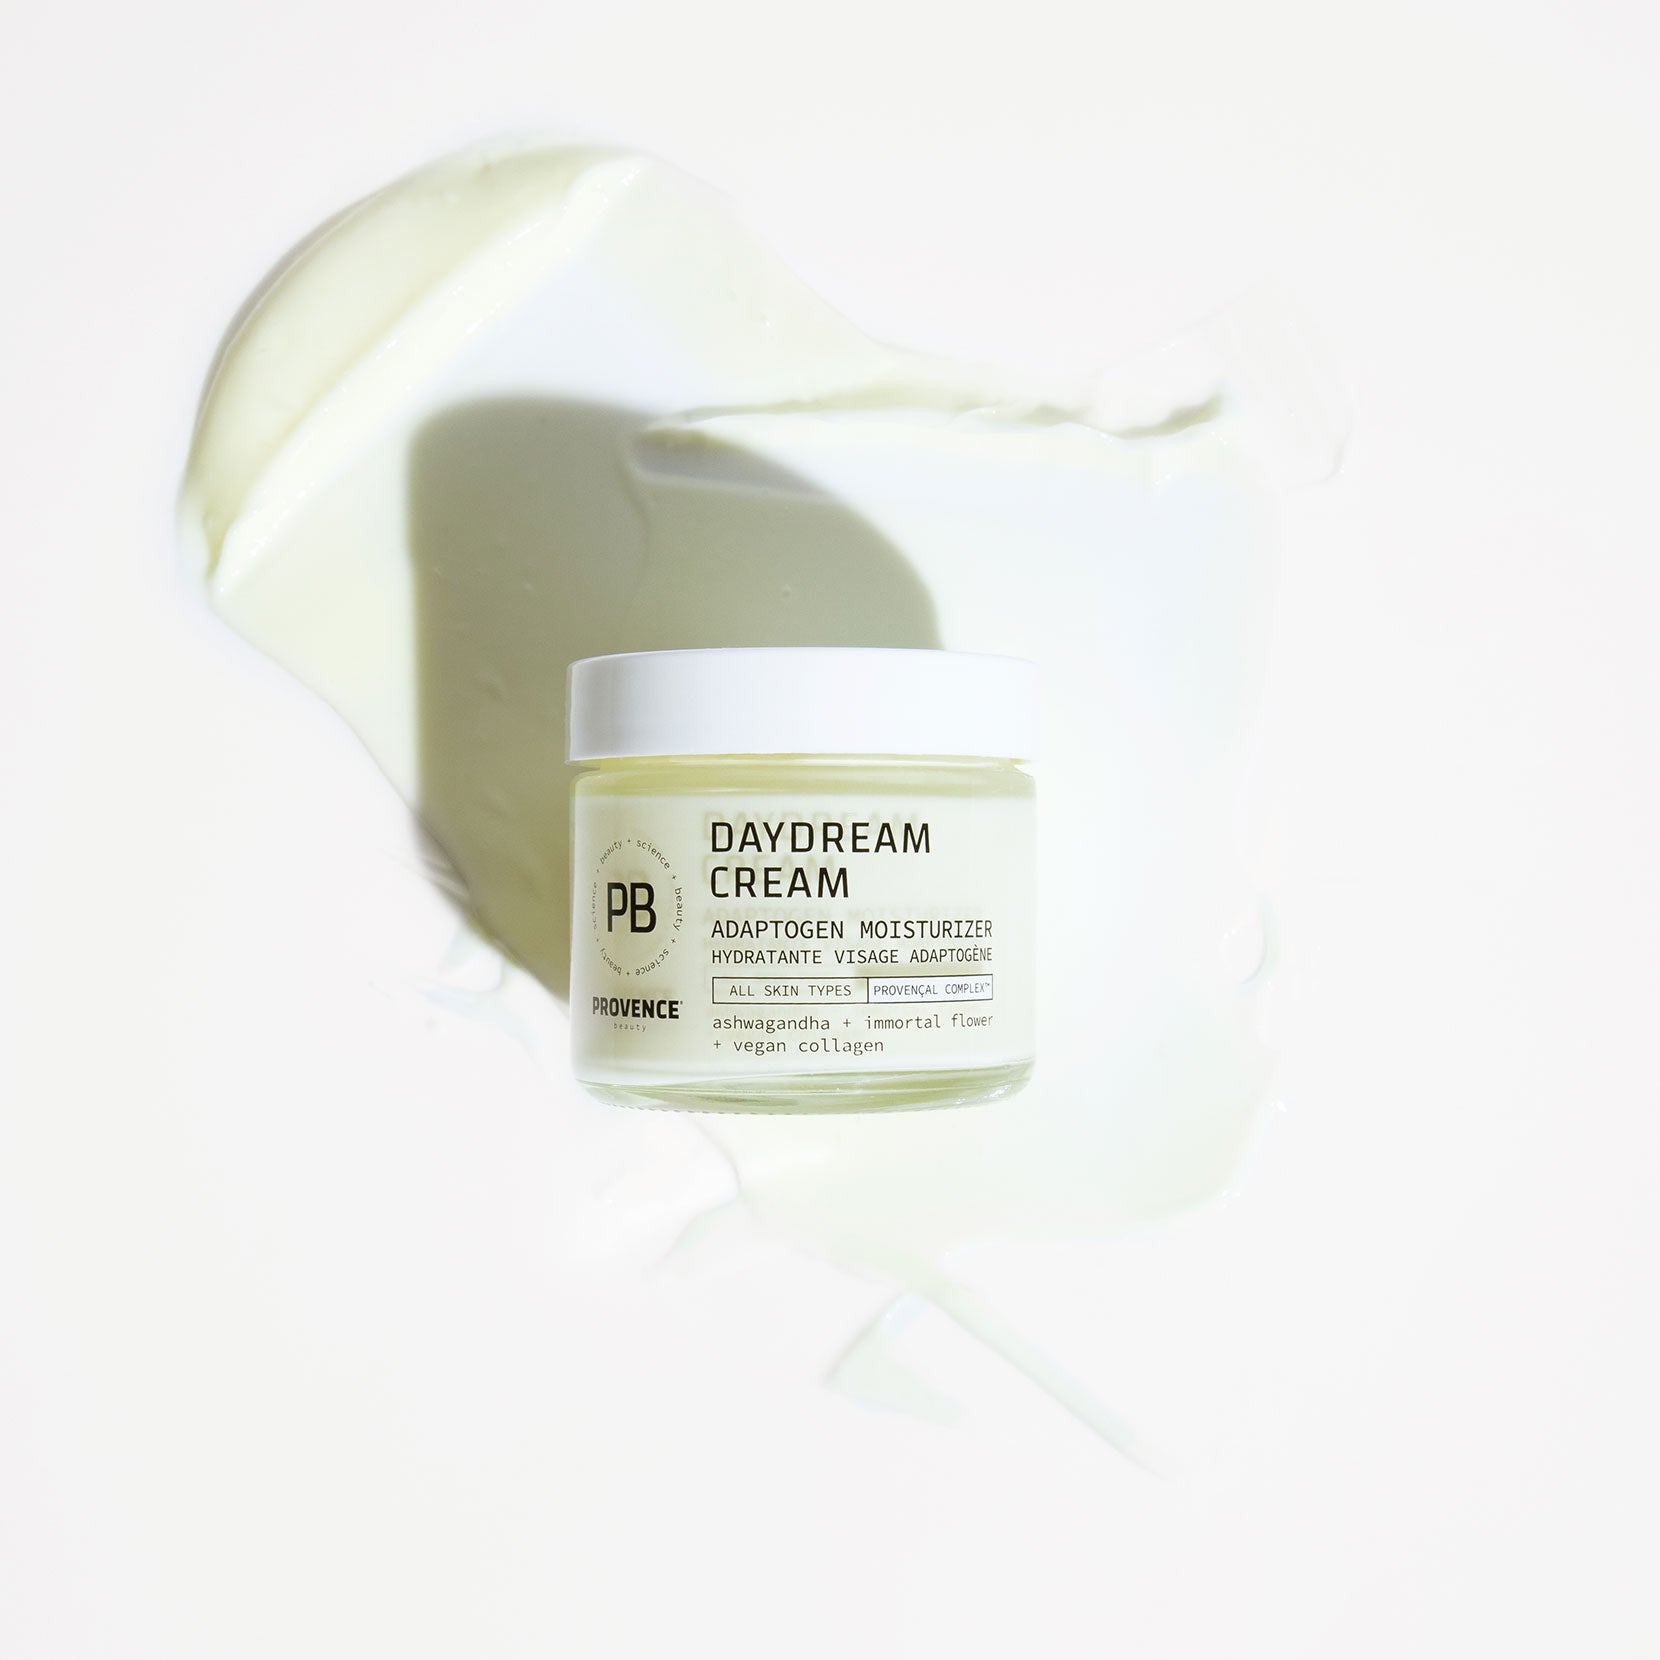 A photo of Daydream Cream Adaptogen Moisturizer glass jar placed on top of the product smeared in the background showing the thick texture.